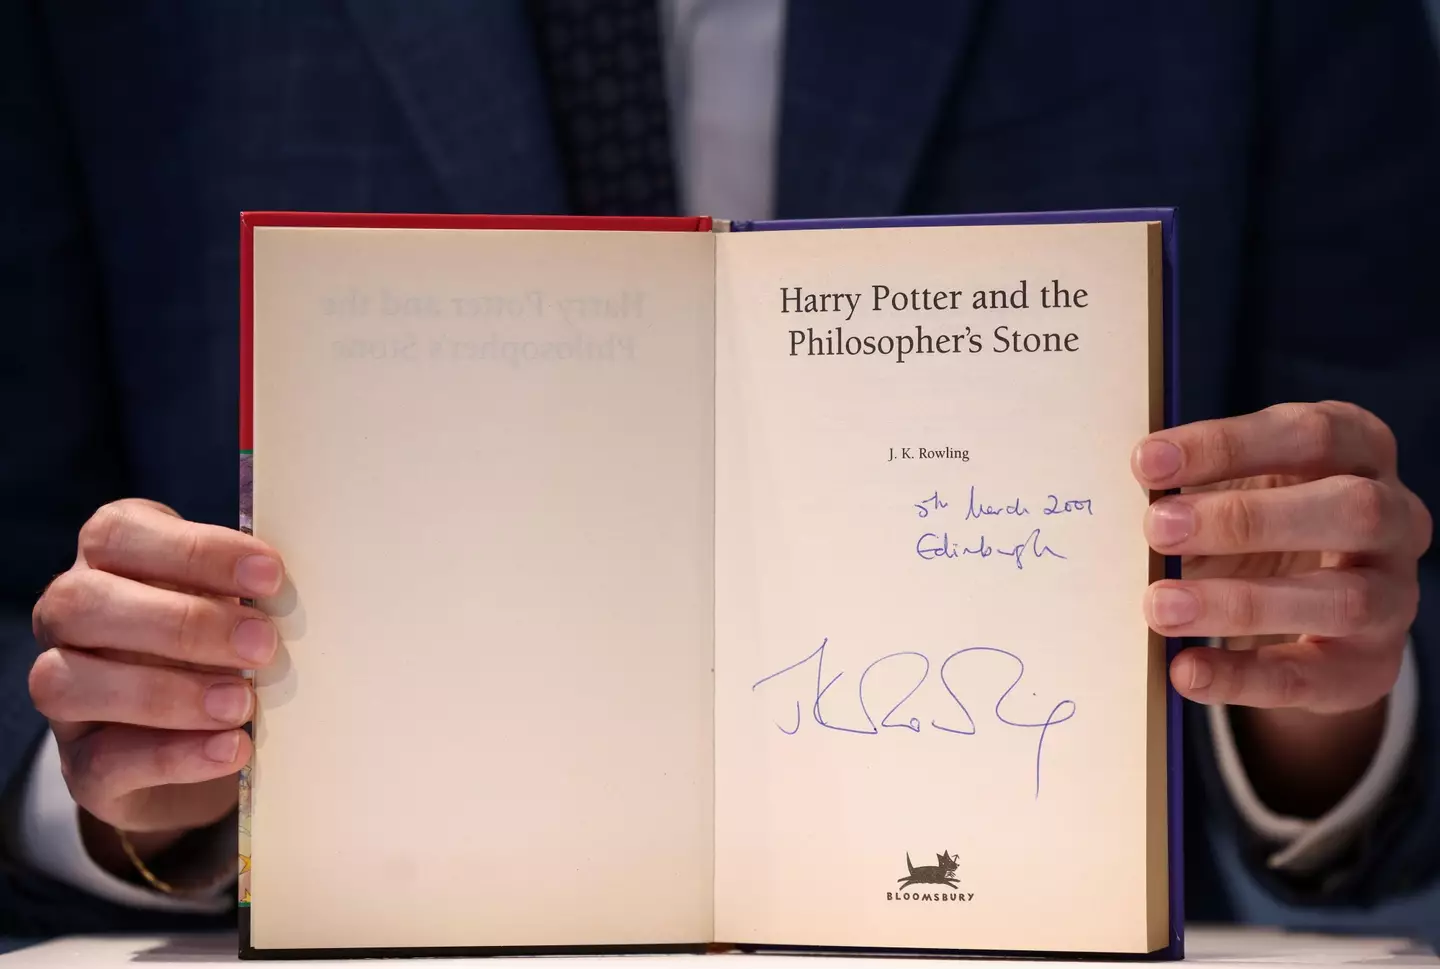 The copy being sold at auction has also been signed by J.K. Rowling.